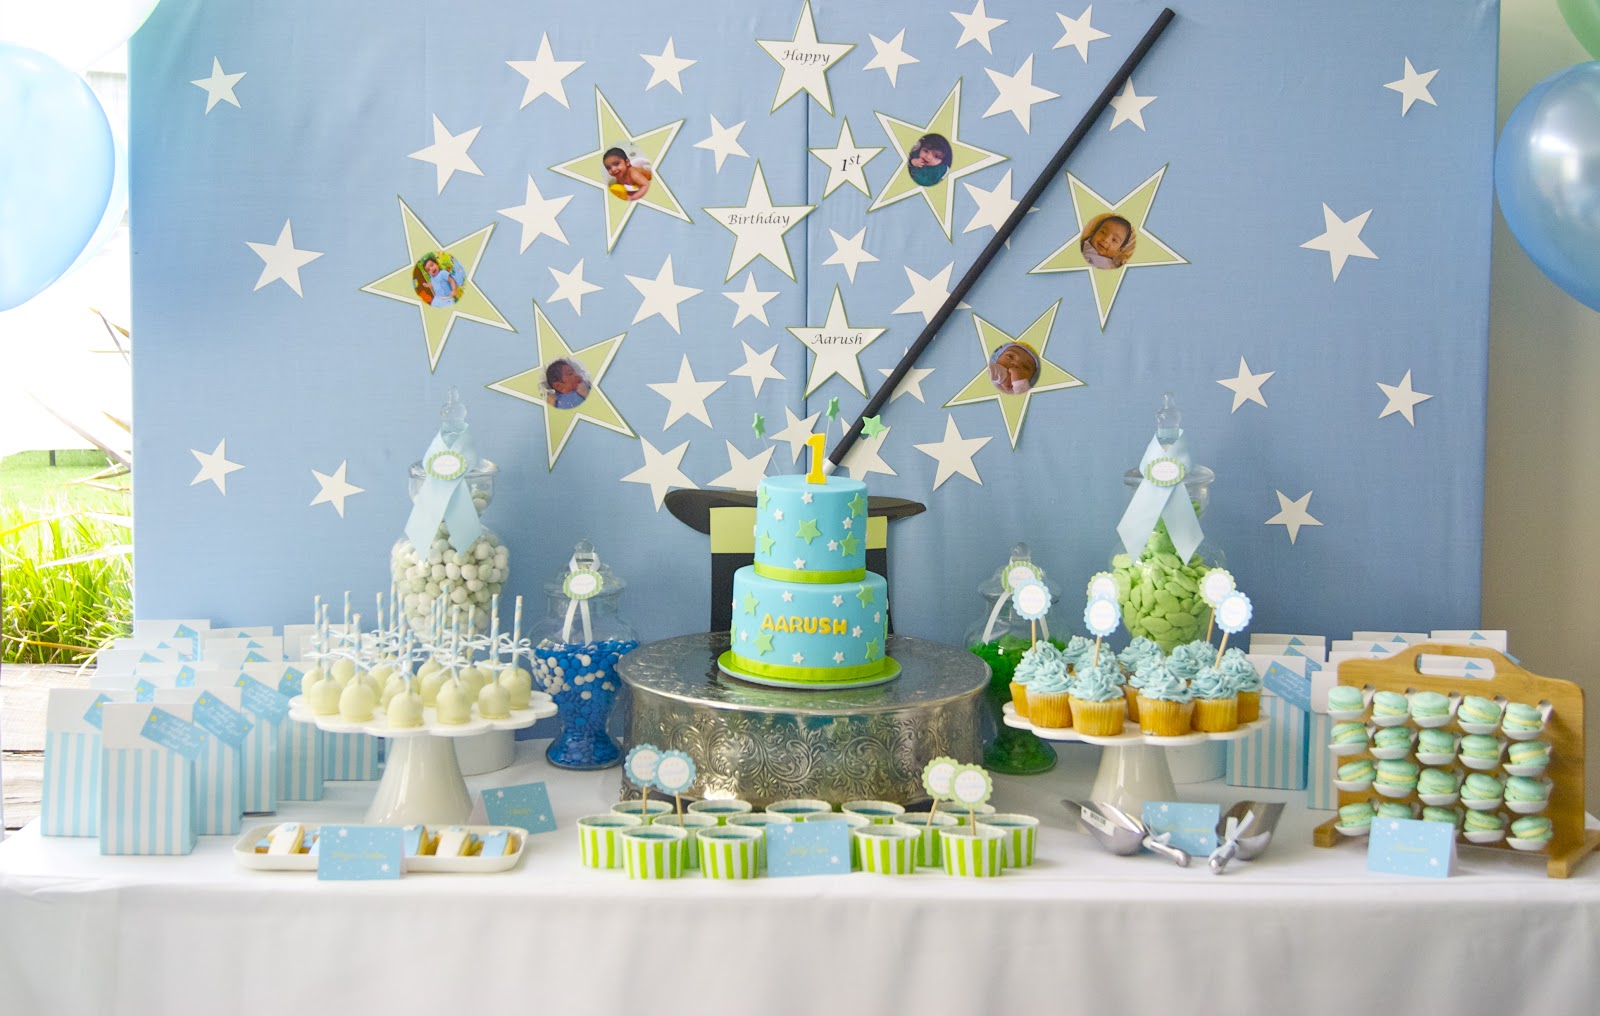 The Inspired Occasion Magical 1st Birthday  in Blue  White  